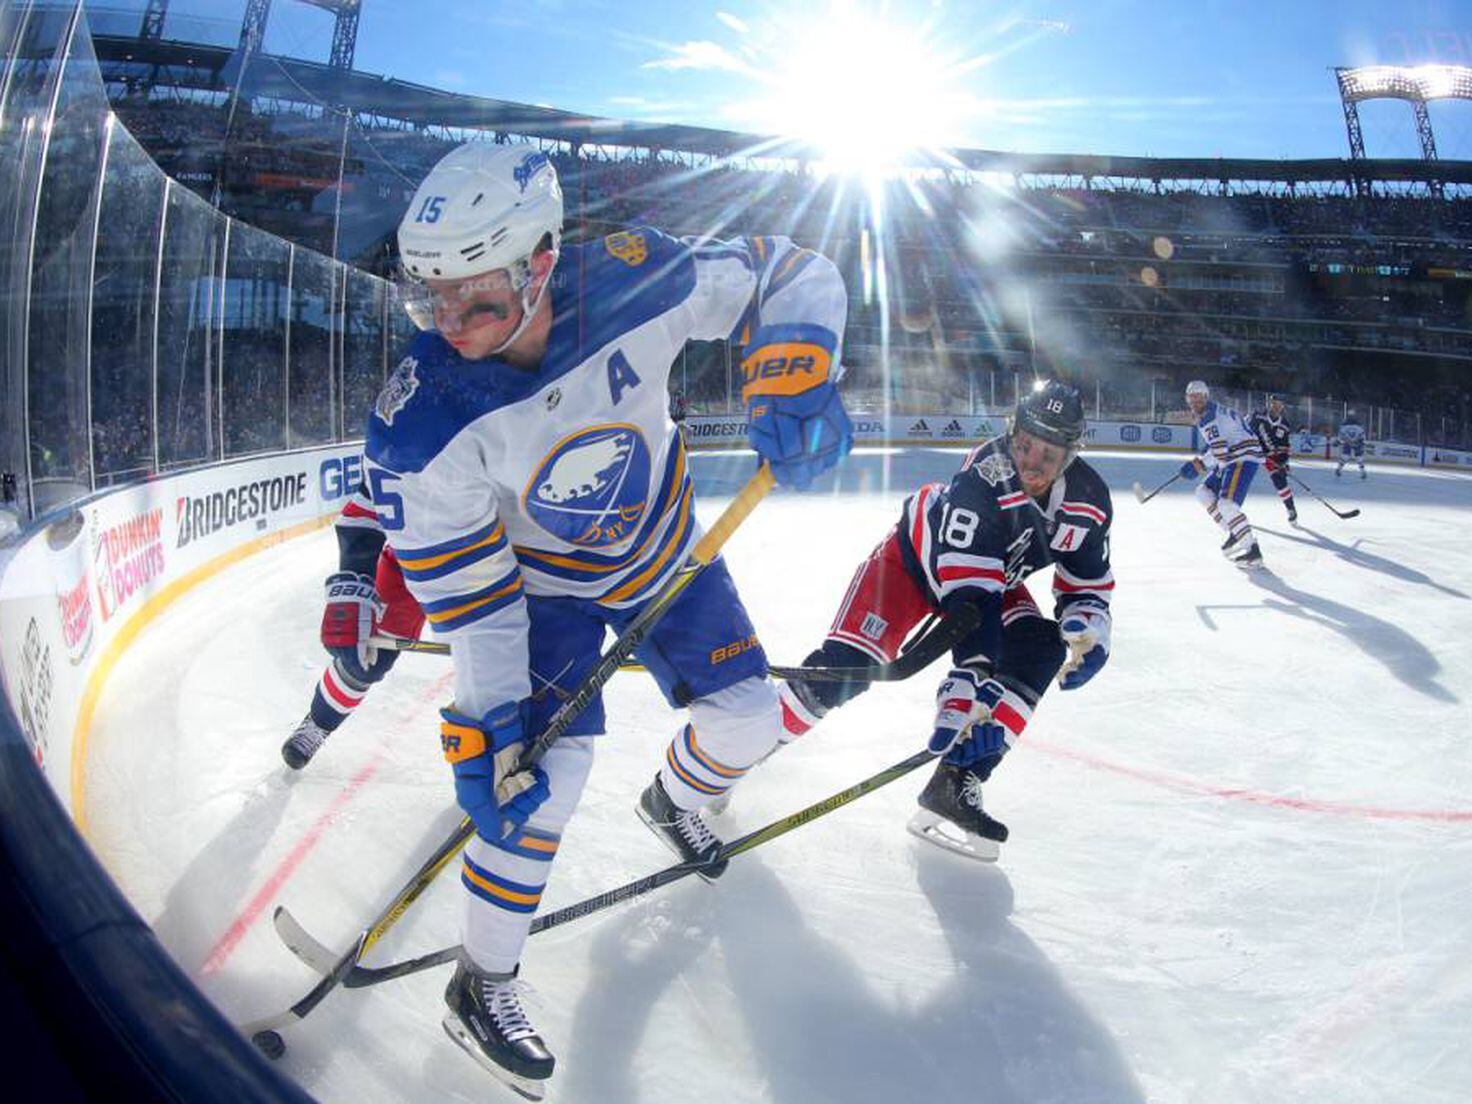 Outdoor NHL Games Are Here to Stay, And That's a Good Thing - The Hockey  News